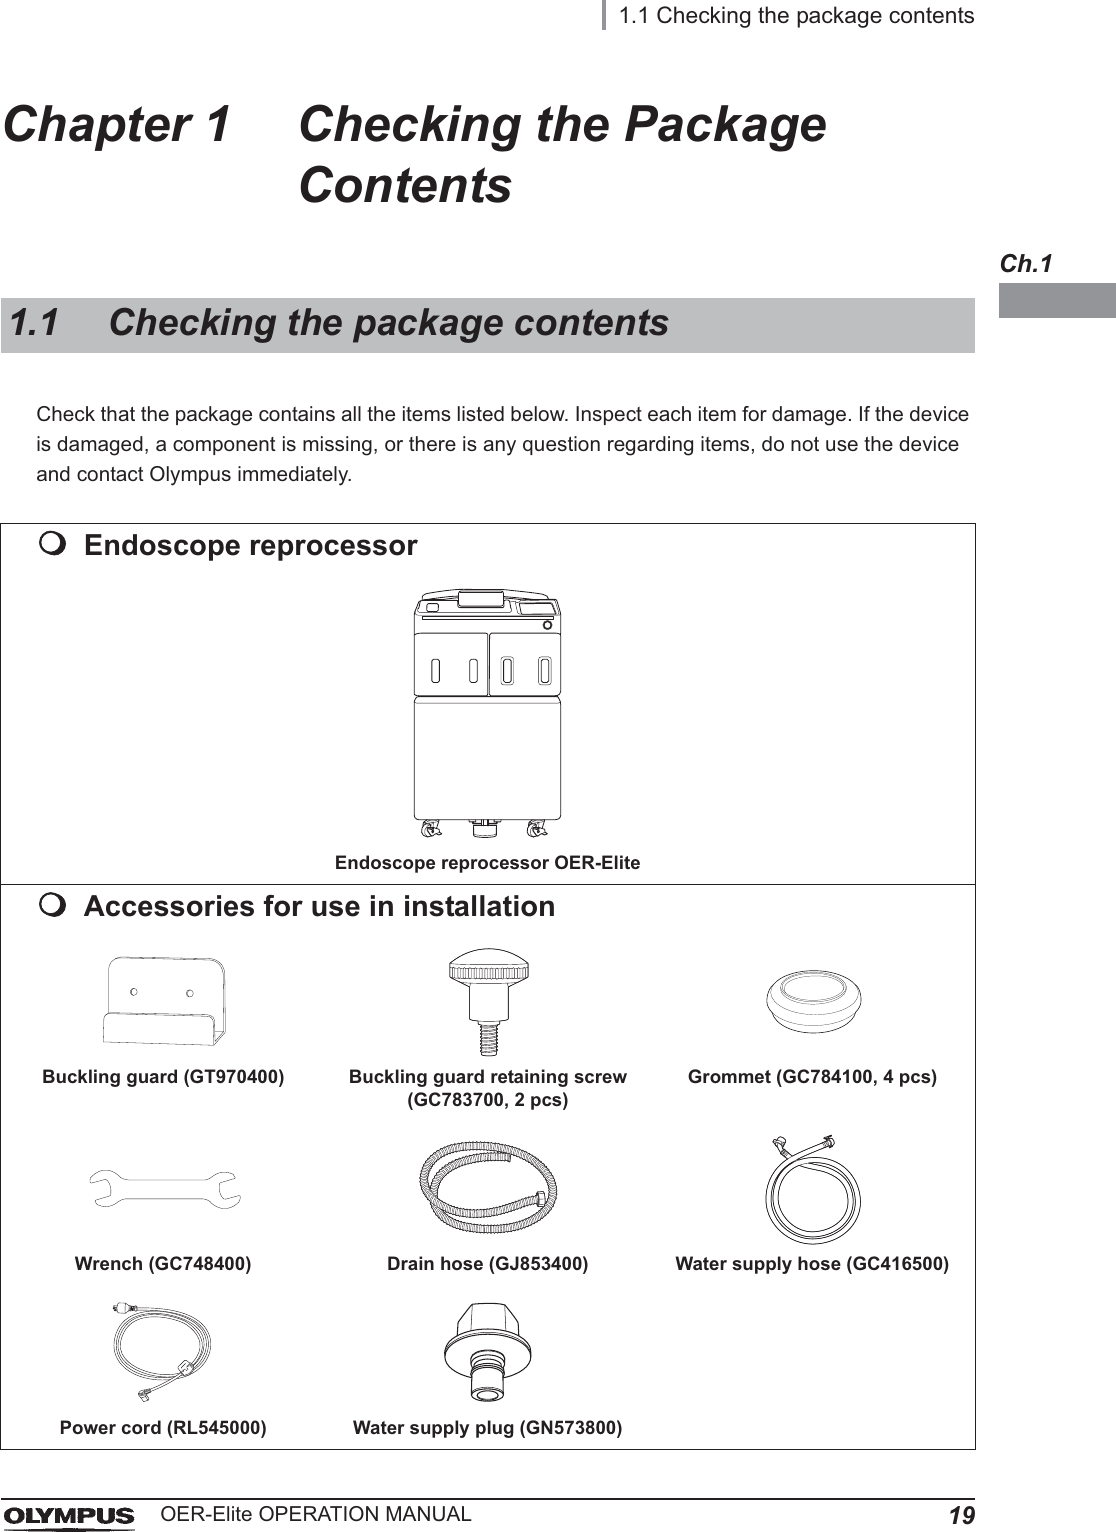 1.1 Checking the package contents19OER-Elite OPERATION MANUALCh.1Chapter 1 Checking the Package ContentsCheck that the package contains all the items listed below. Inspect each item for damage. If the device is damaged, a component is missing, or there is any question regarding items, do not use the device and contact Olympus immediately.1.1 Checking the package contentsEndoscope reprocessorEndoscope reprocessor OER-EliteAccessories for use in installationBuckling guard (GT970400) Buckling guard retaining screw (GC783700, 2 pcs)Grommet (GC784100, 4 pcs)Wrench (GC748400) Drain hose (GJ853400) Water supply hose (GC416500)Power cord (RL545000) Water supply plug (GN573800)